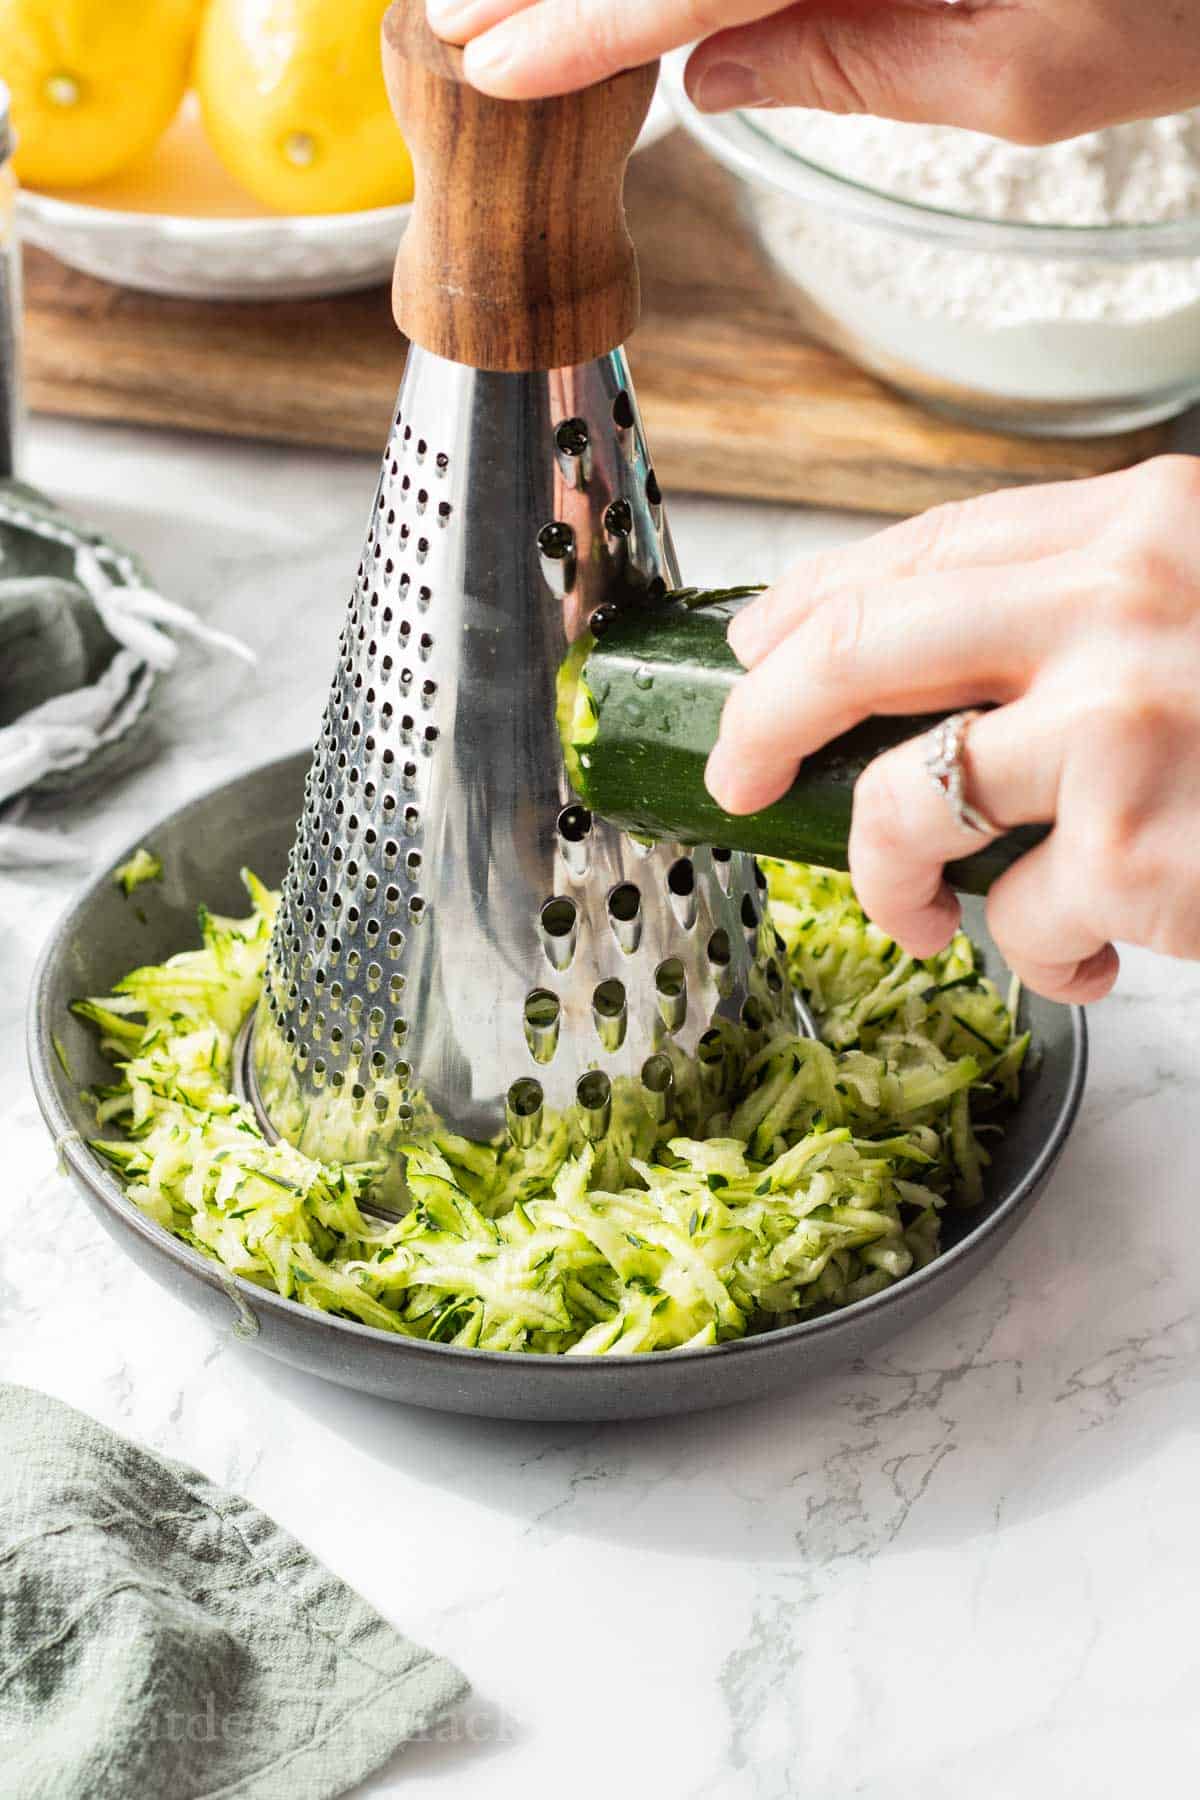 Hand grating zucchini into a plate.